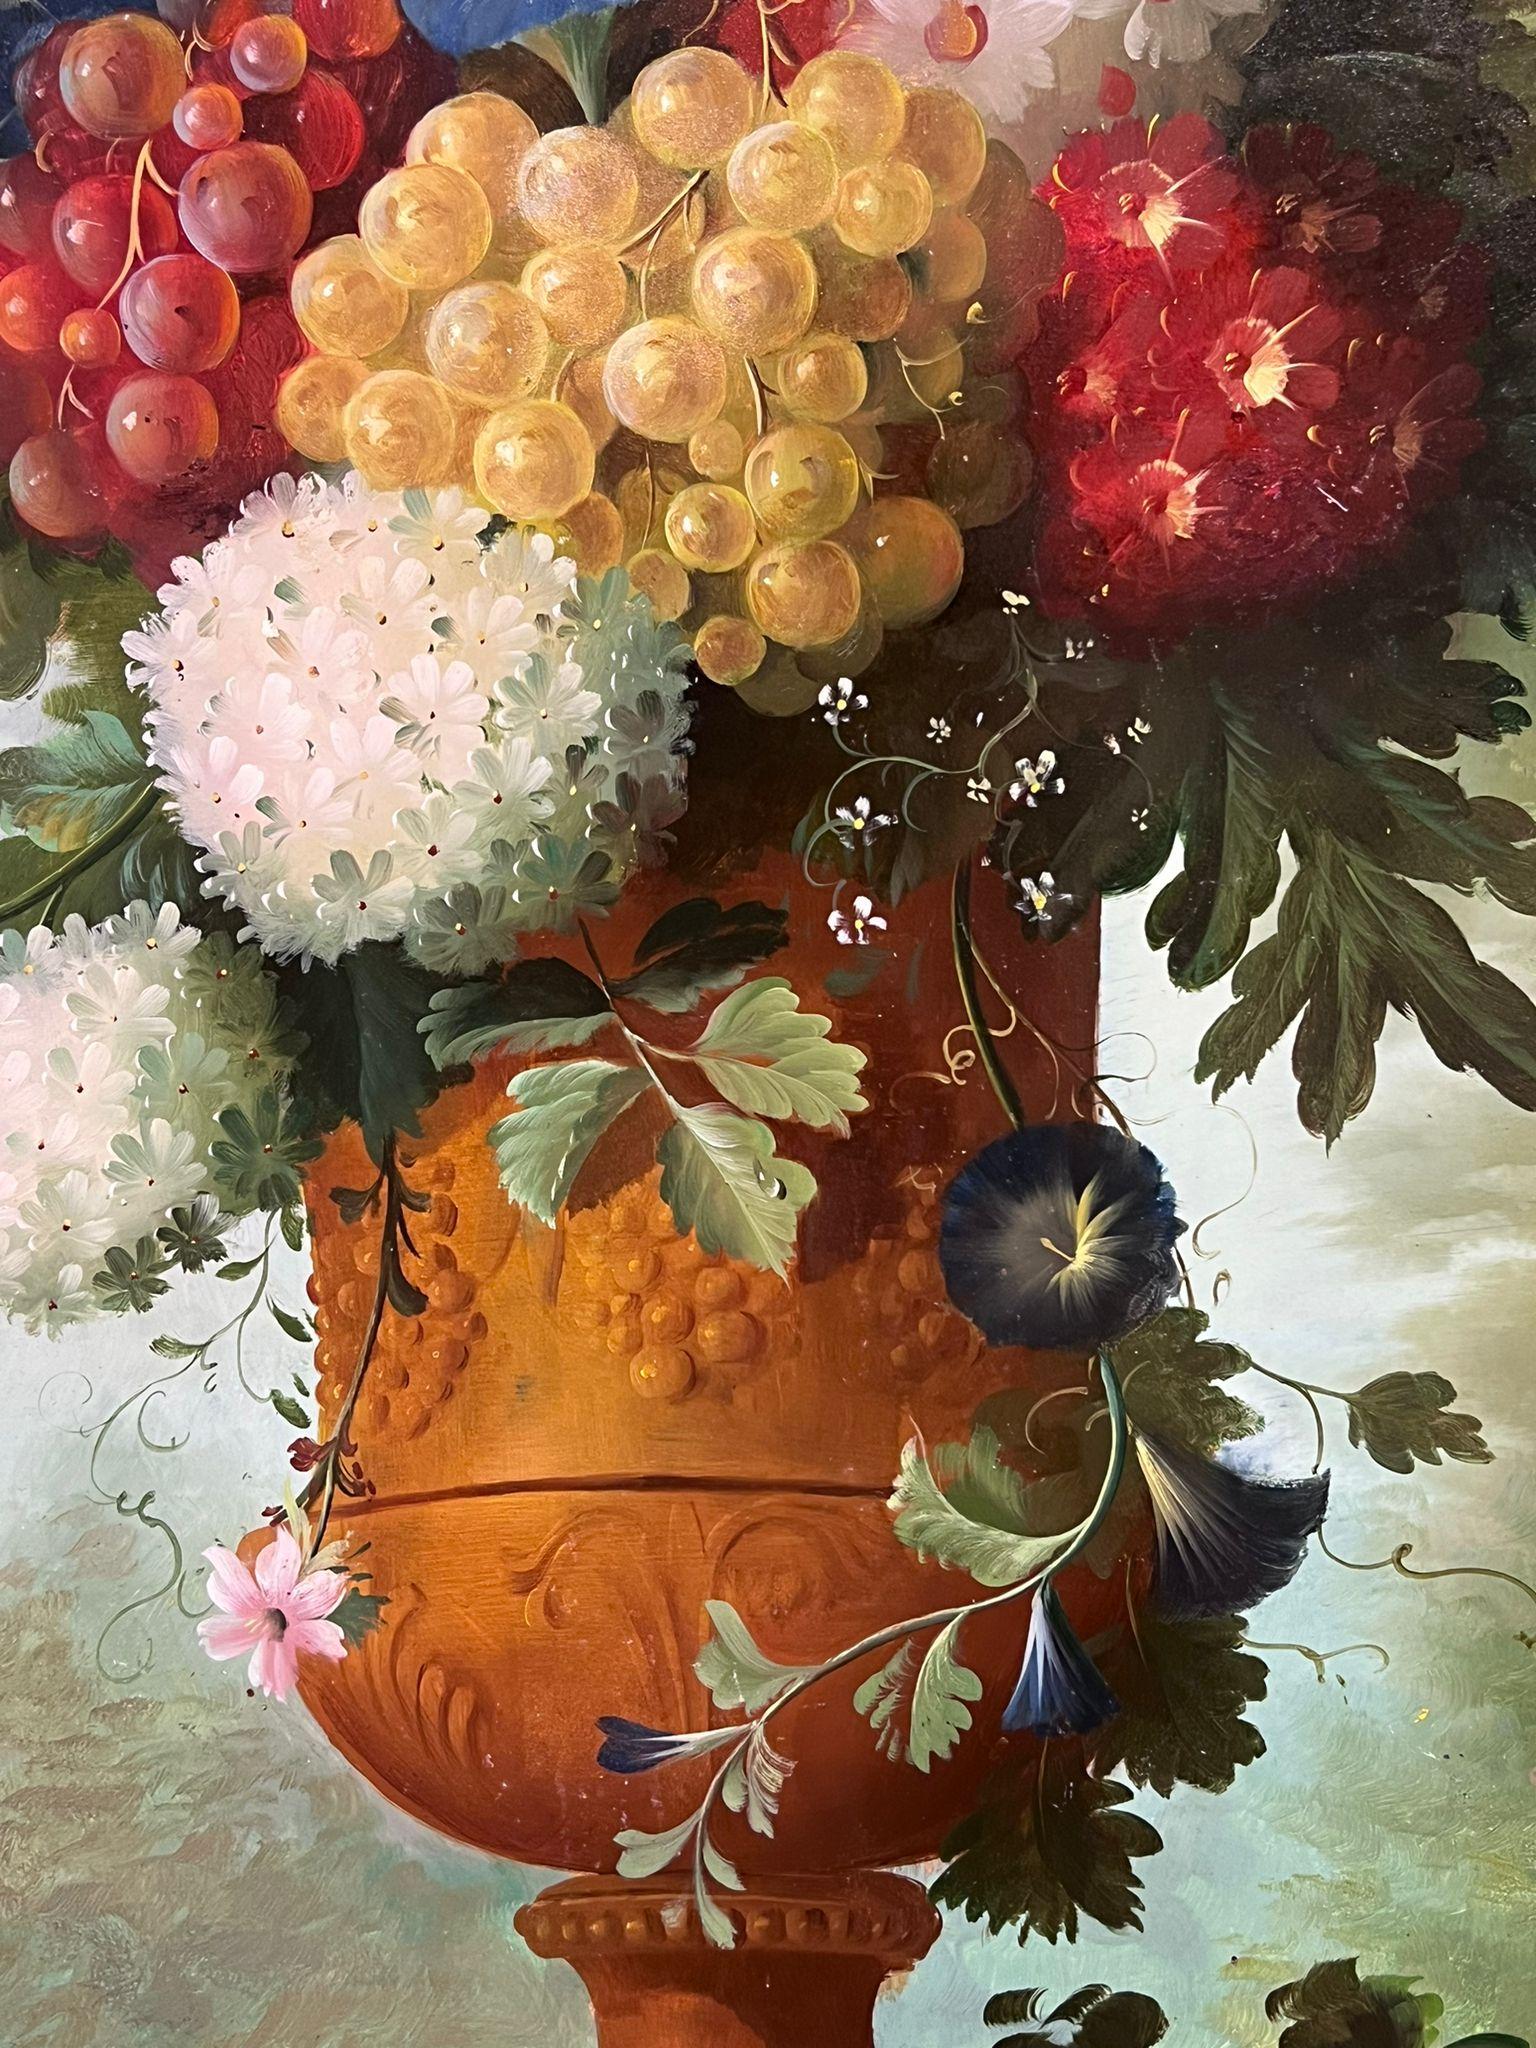 Classical Still Life of Flowers
by Thomas Webster, British contemporary artist
late 20th century
signed oil on board, unframed
board: 30 x 18 inches
provenance: private collection, UK
condition: minor scuffs but overall good and sound condition 